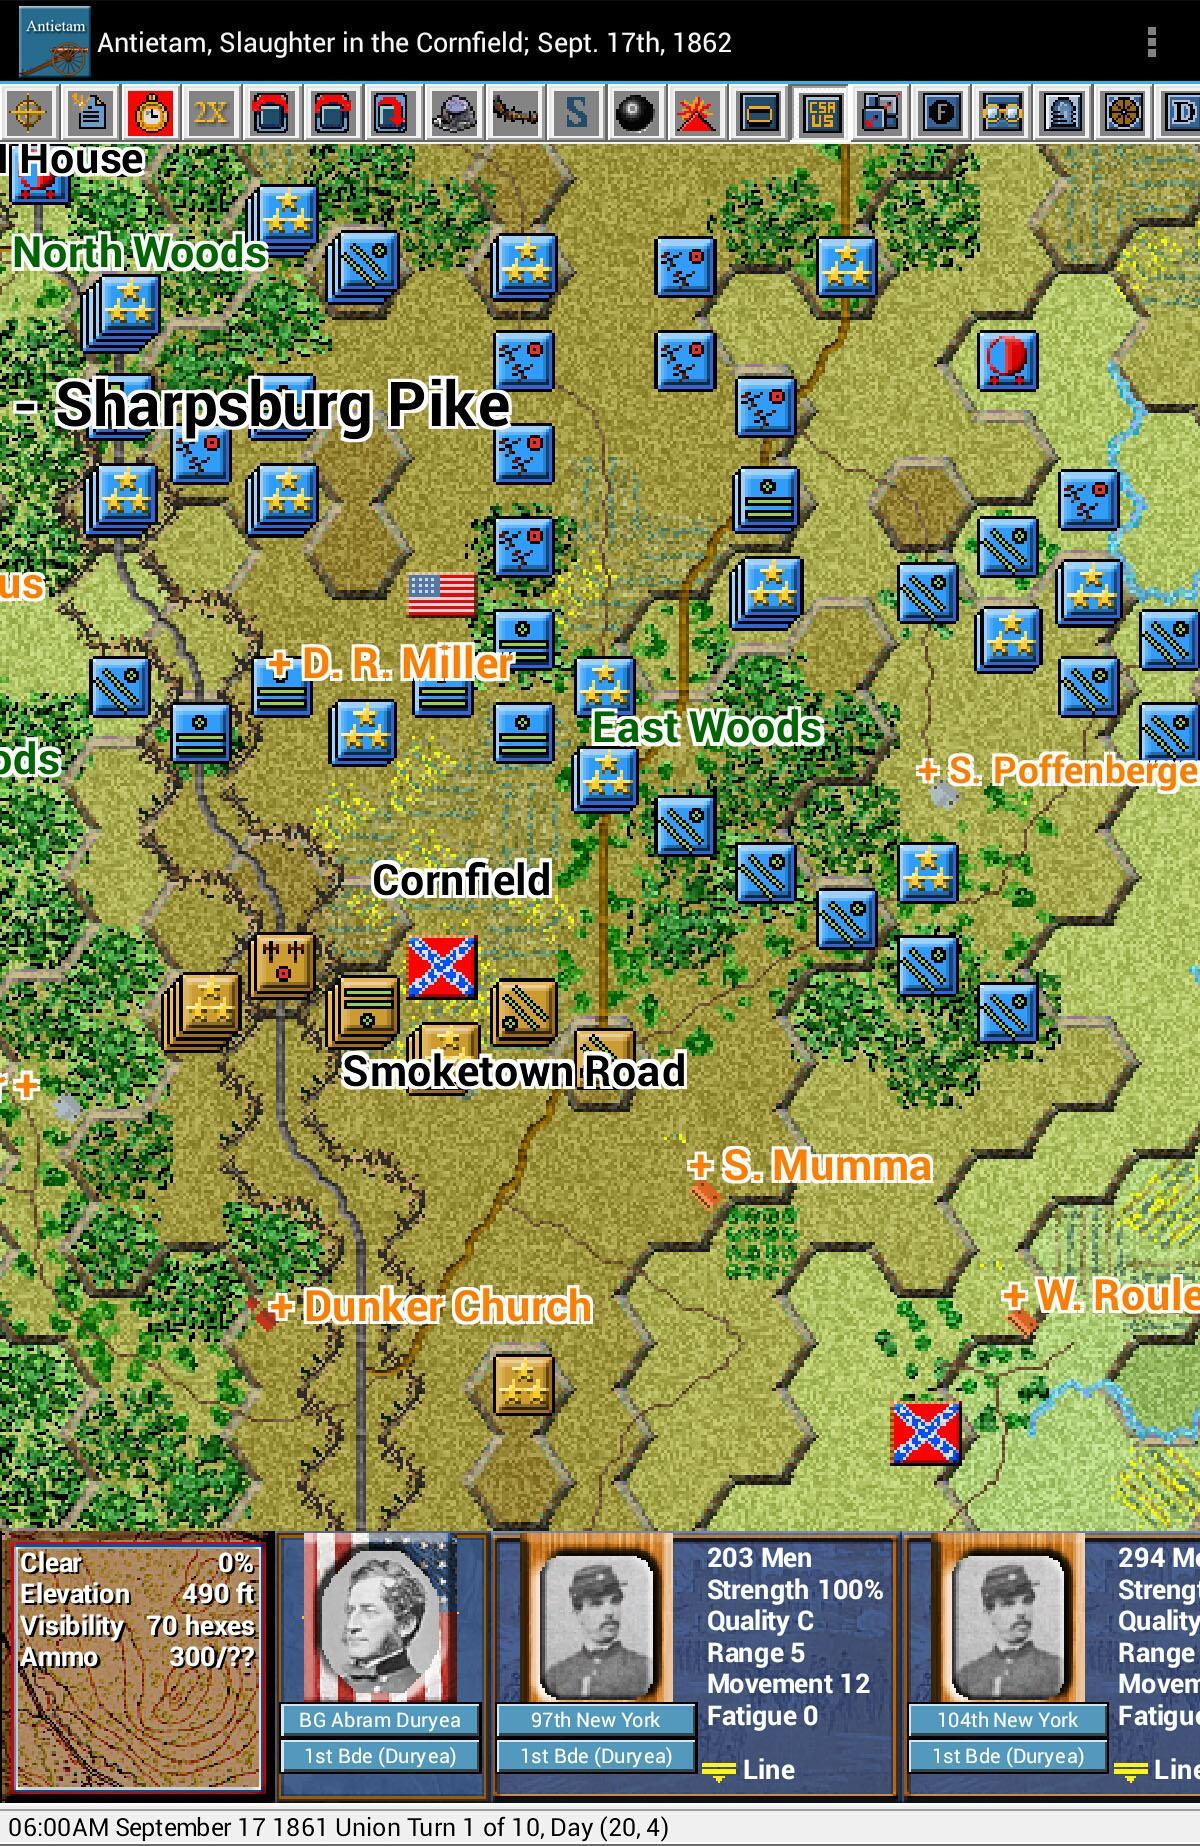 The army idle strategy game